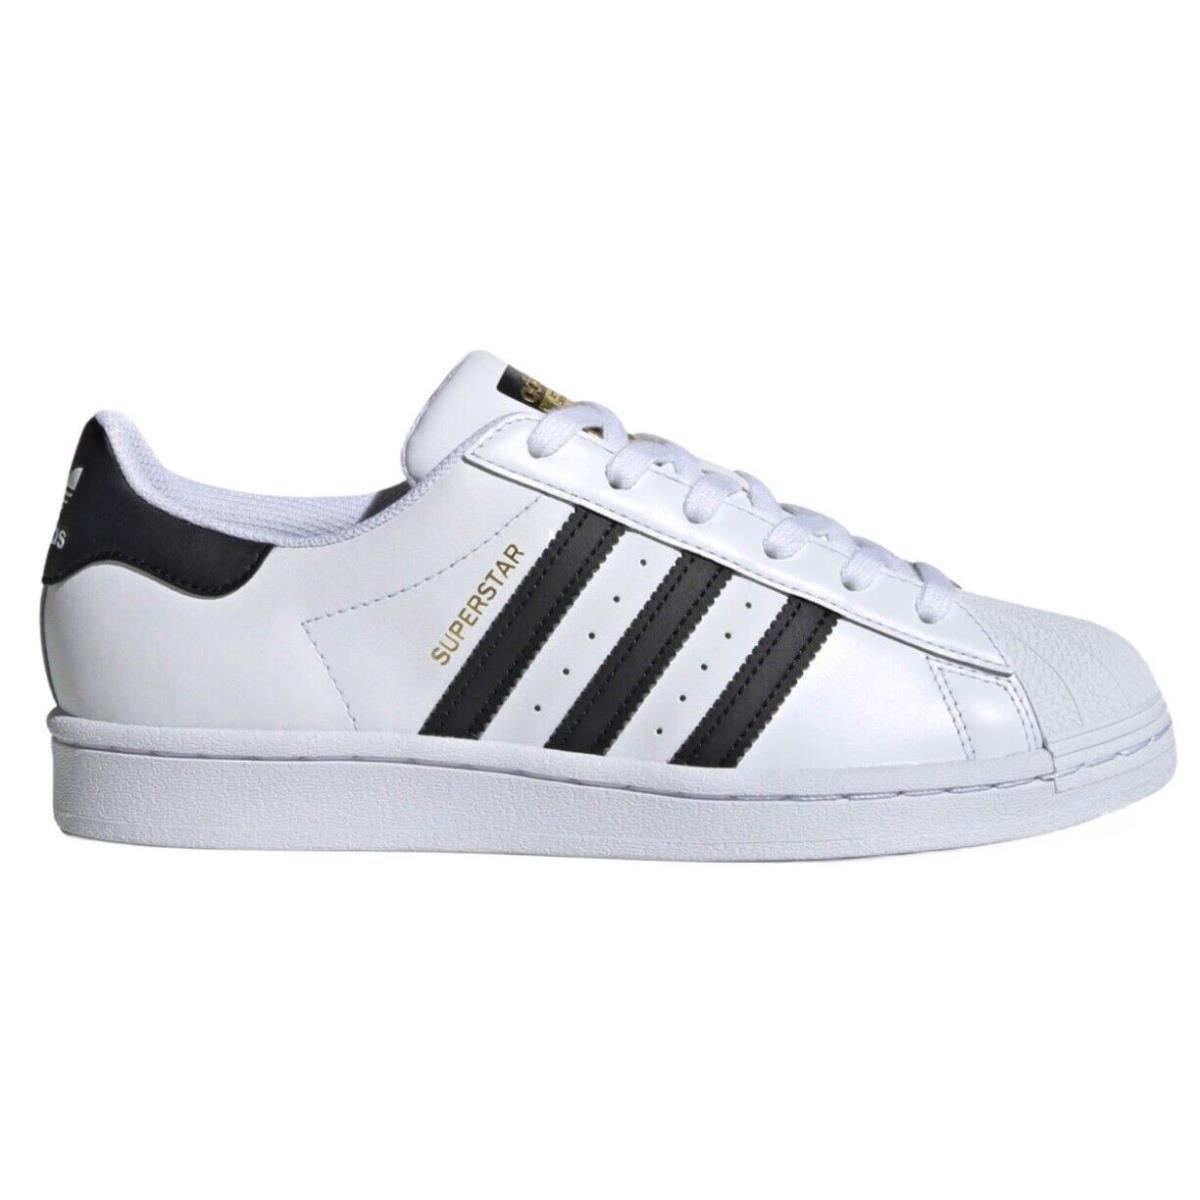 Adidas Superstar Womens FV3284 White Black Leather Shell Toe Shoes